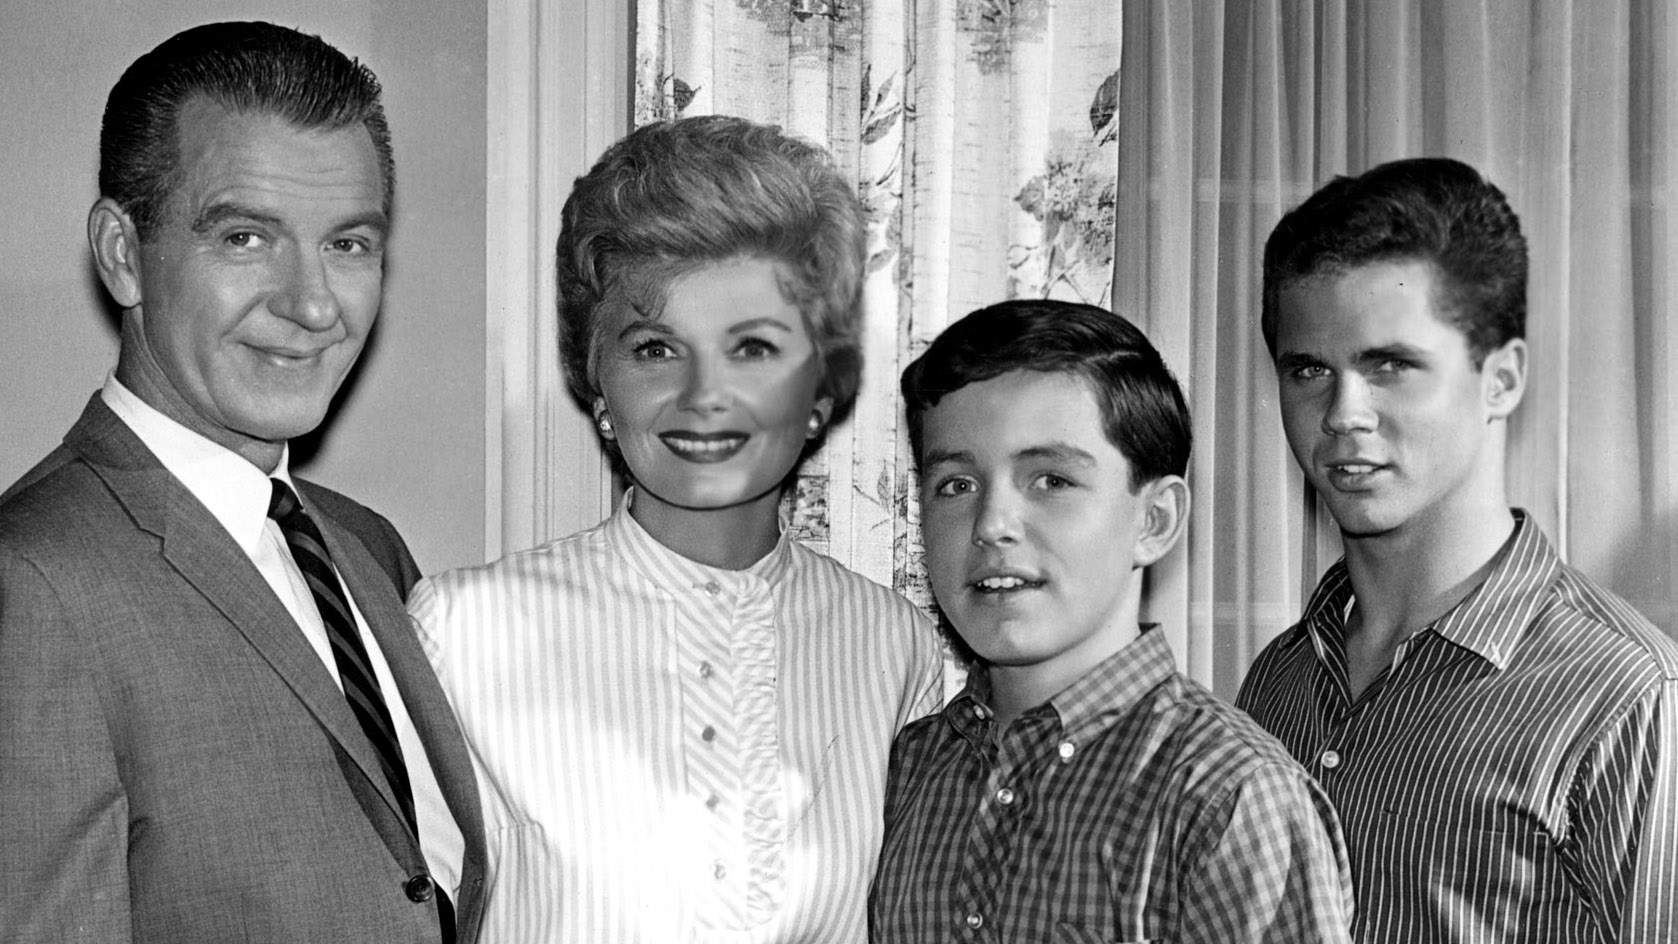 LEAVE IT TO BEAVER, Hugh Beaumont, Barbara Billingsley, Jerry Mathers, Tony Dow 